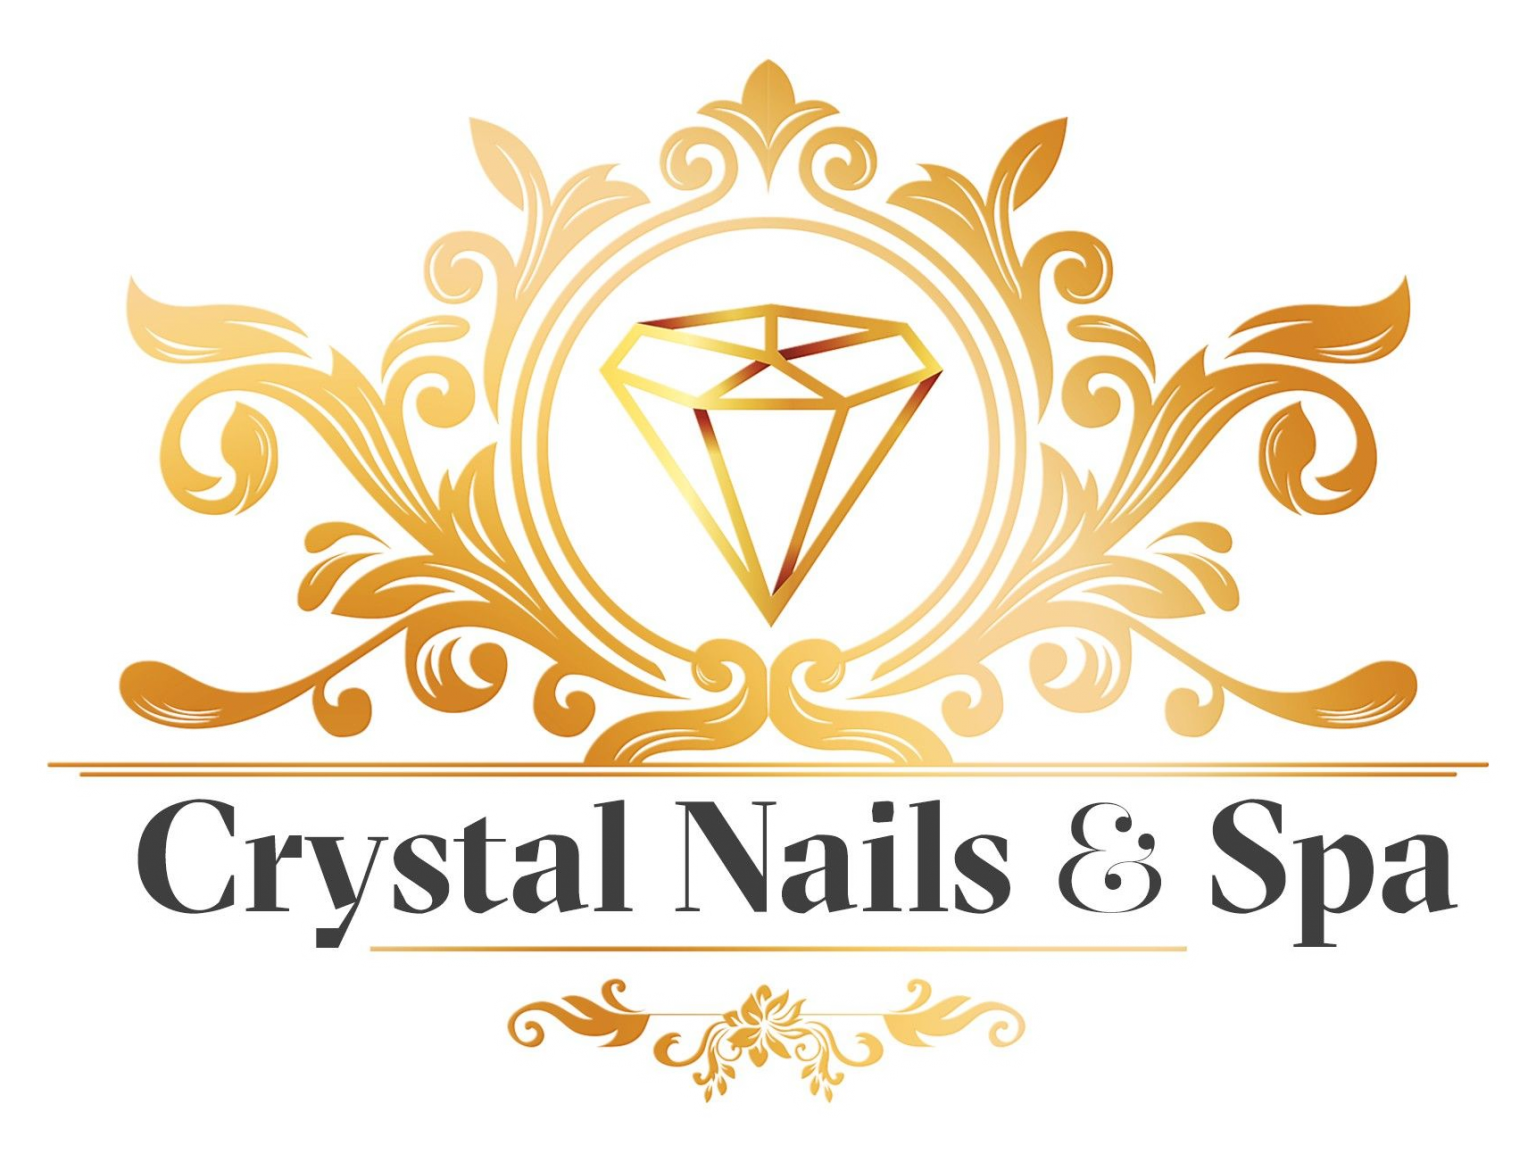 Crystal Nails & Spa: dedicated to bringing top of the line products ...